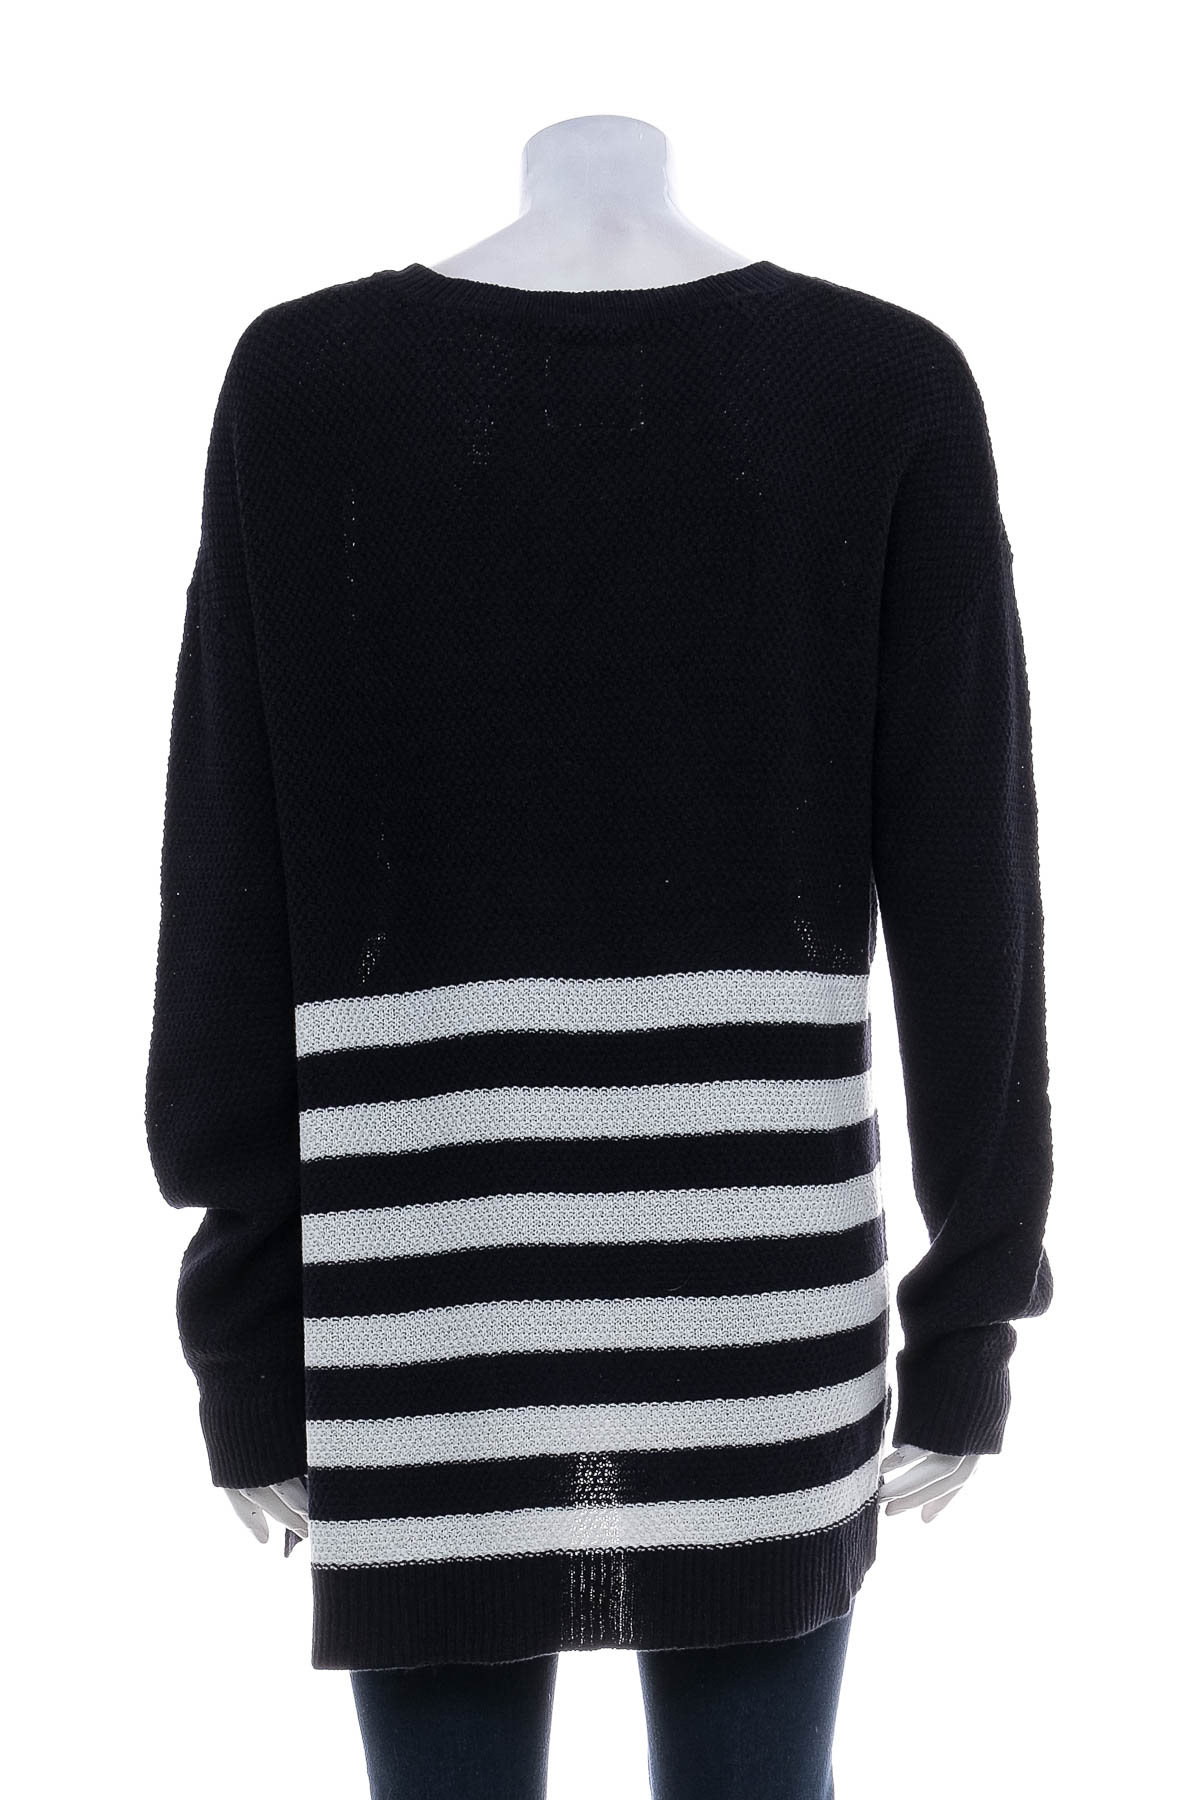 Women's sweater - Archy&Co. by COTTON:ON - 1